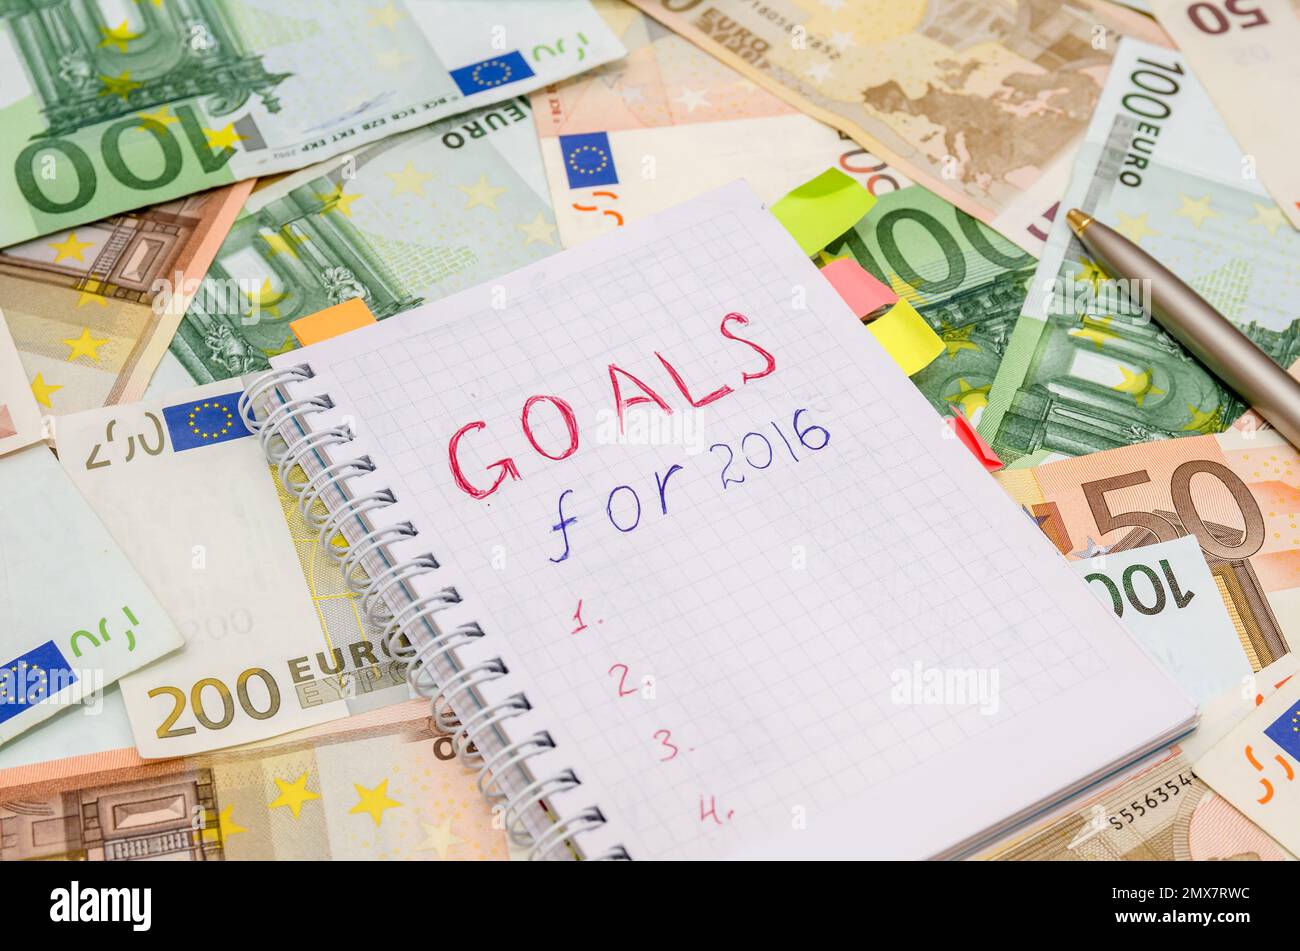 resolutions for new year 2016 with euro bills Stock Photo